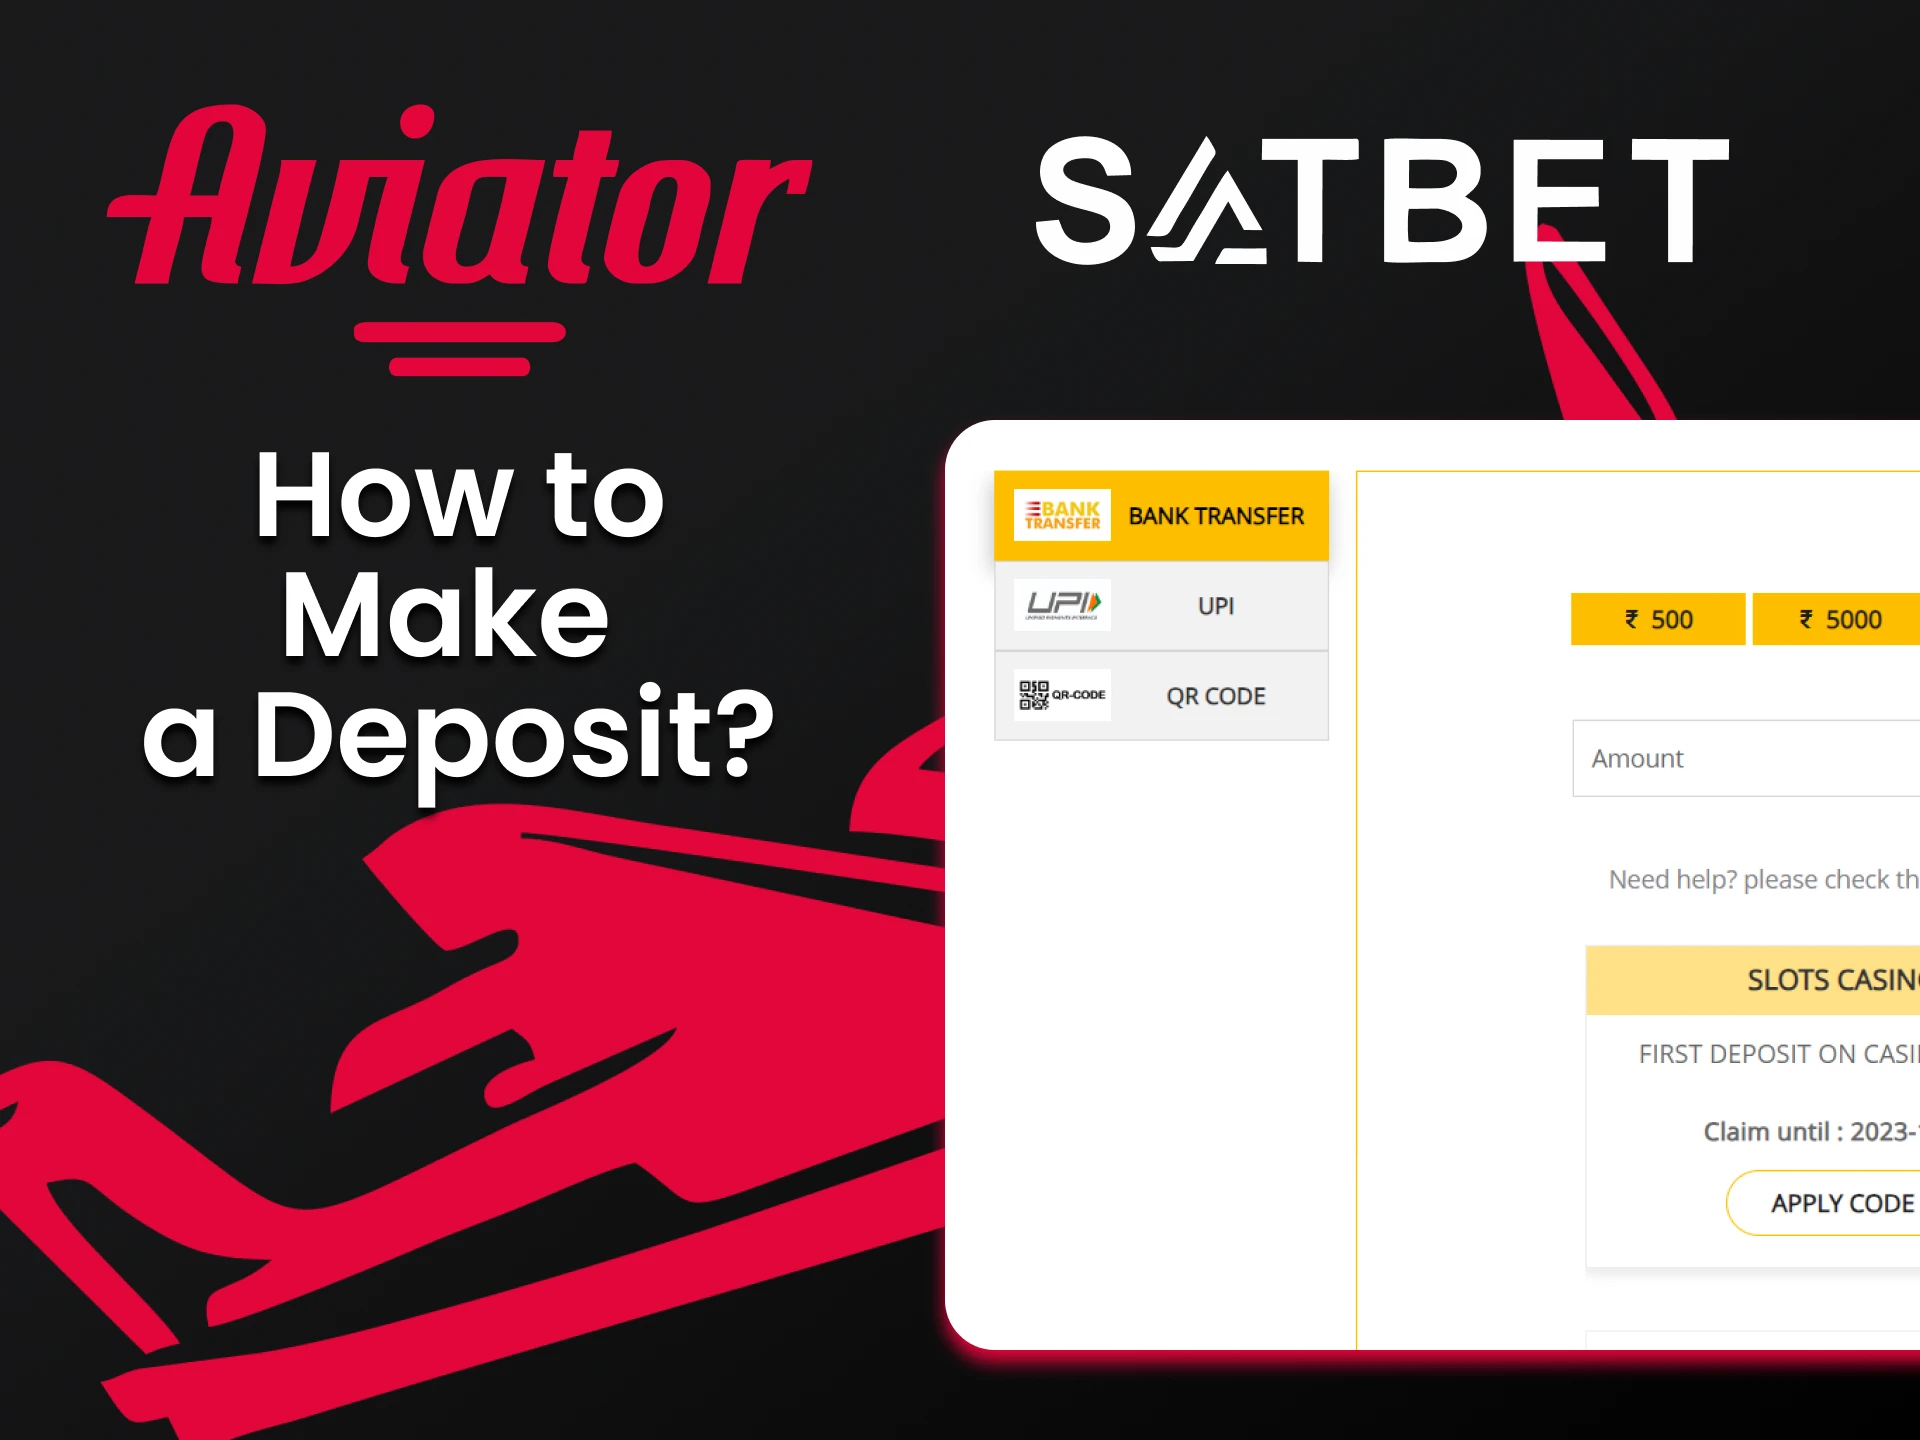 Choose your method of depositing funds on Satbet.